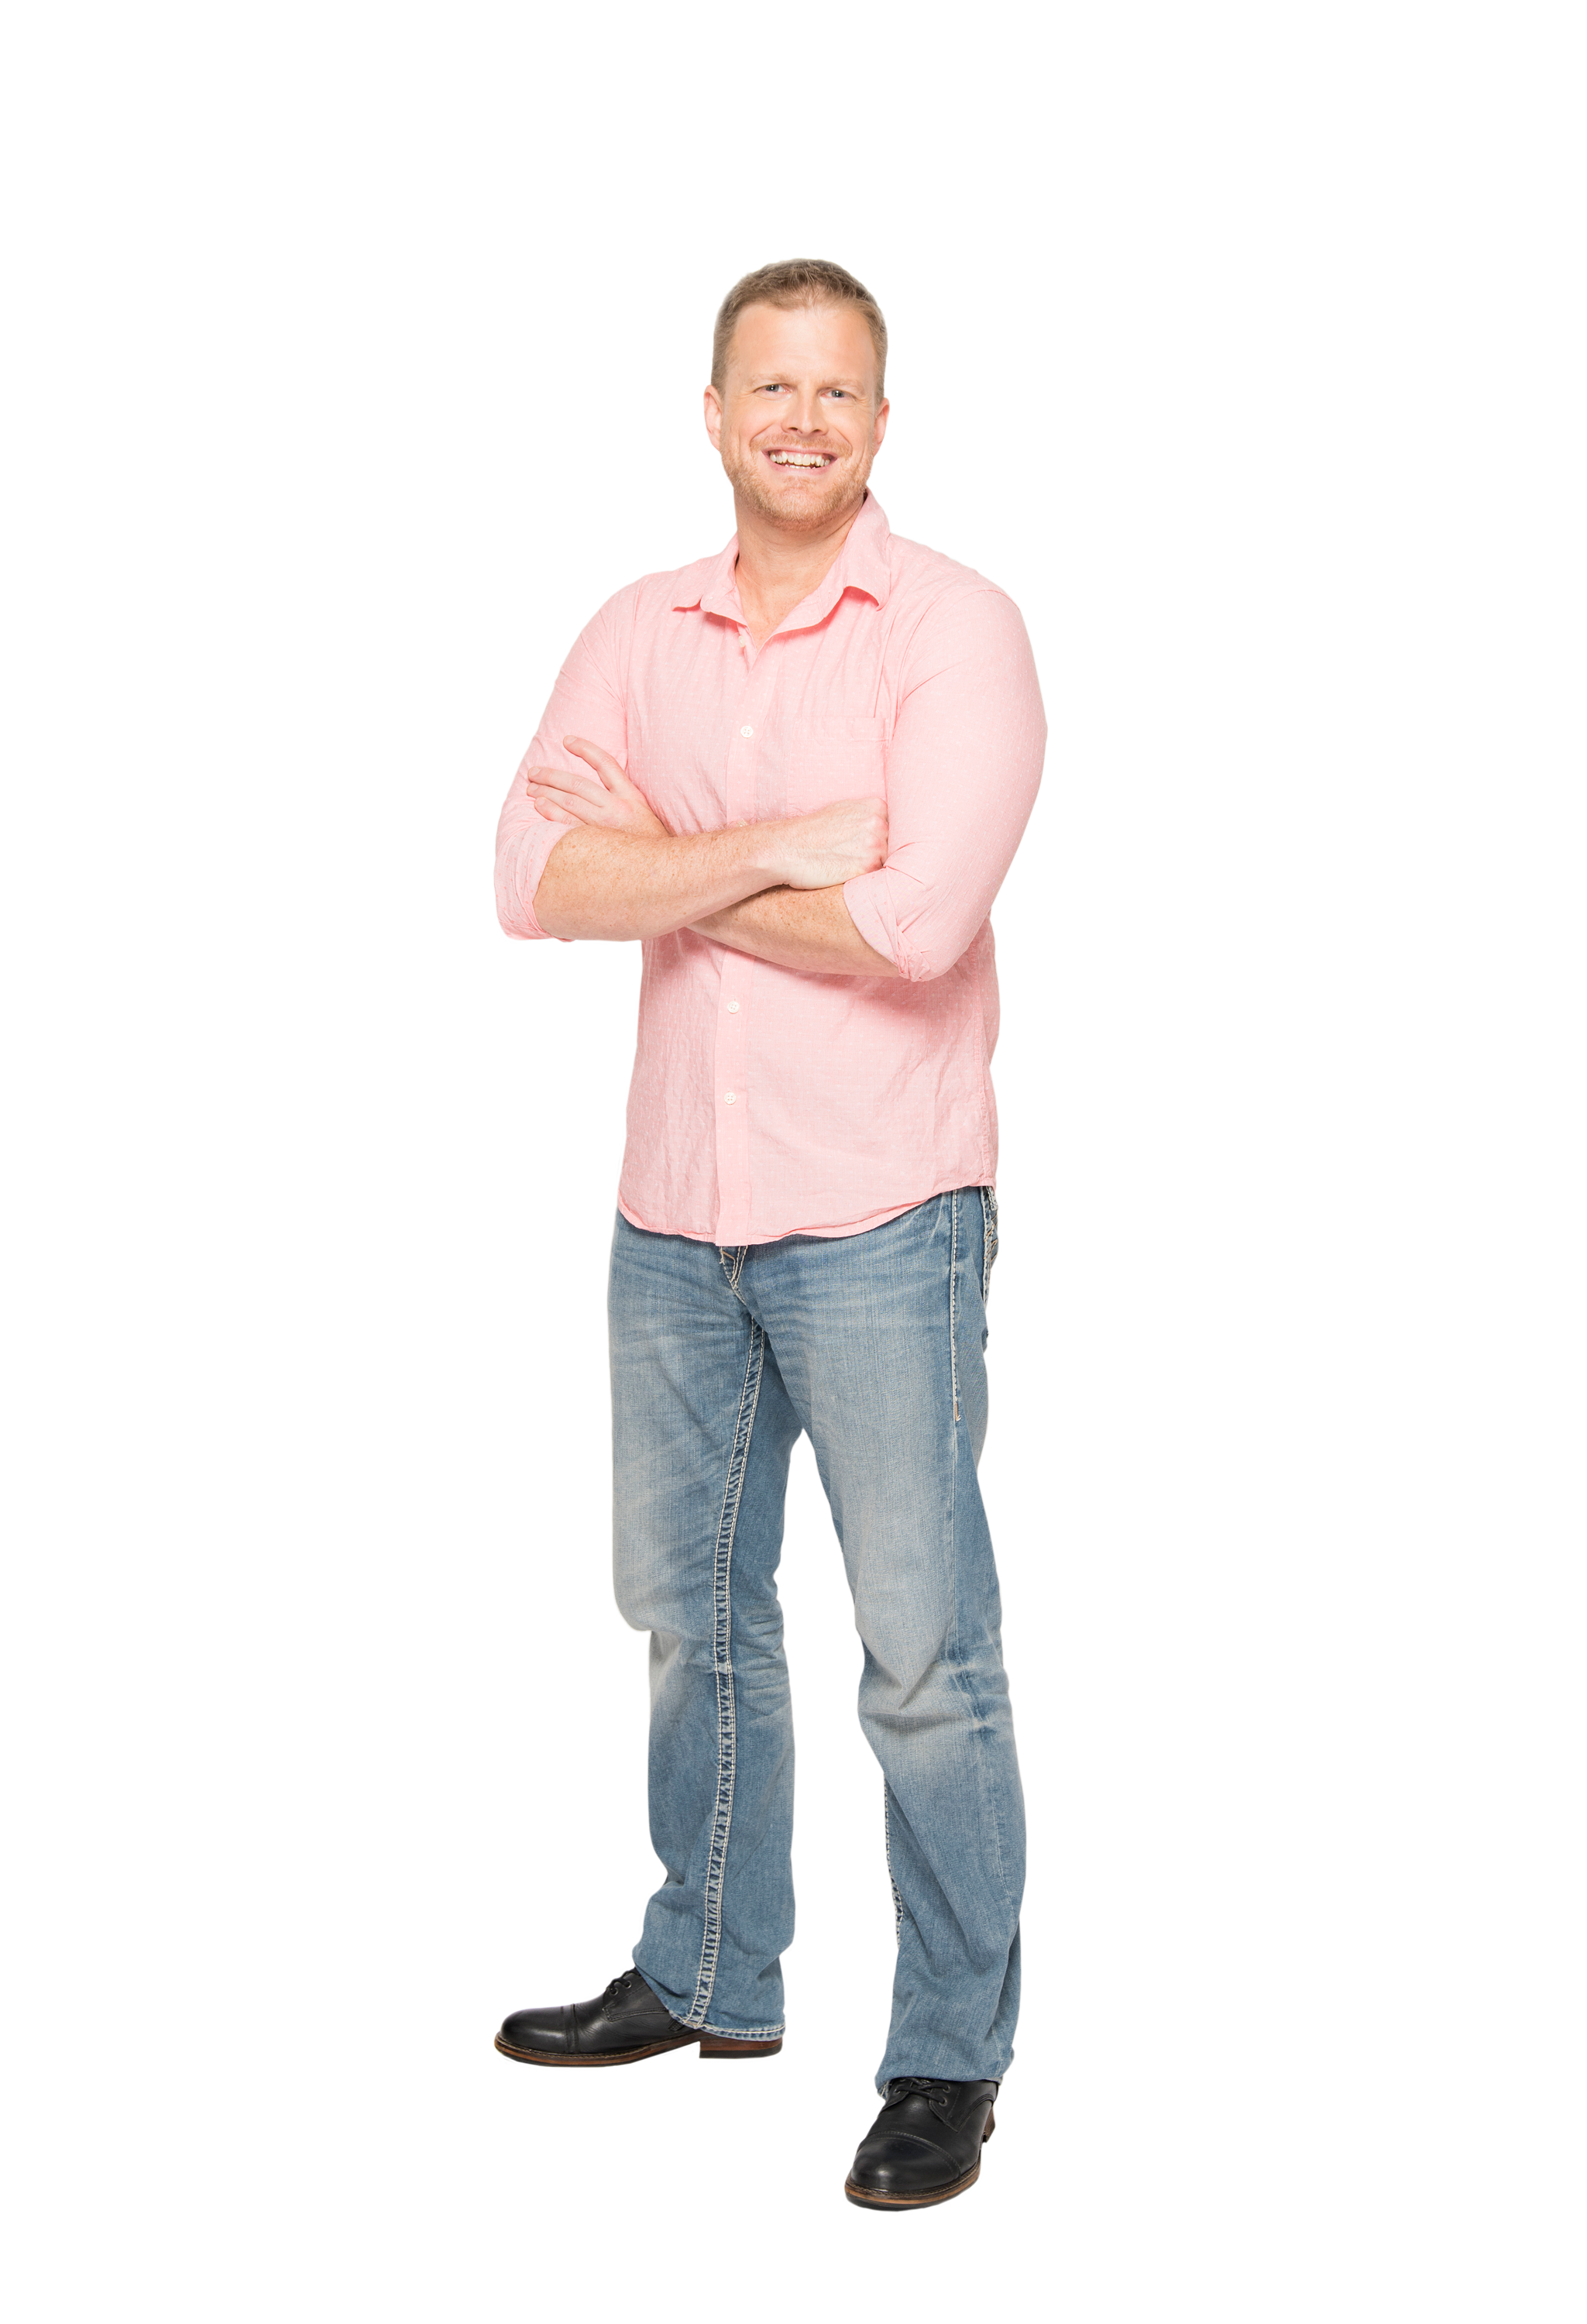 Tim Hartman new Z99 Morning Show personality